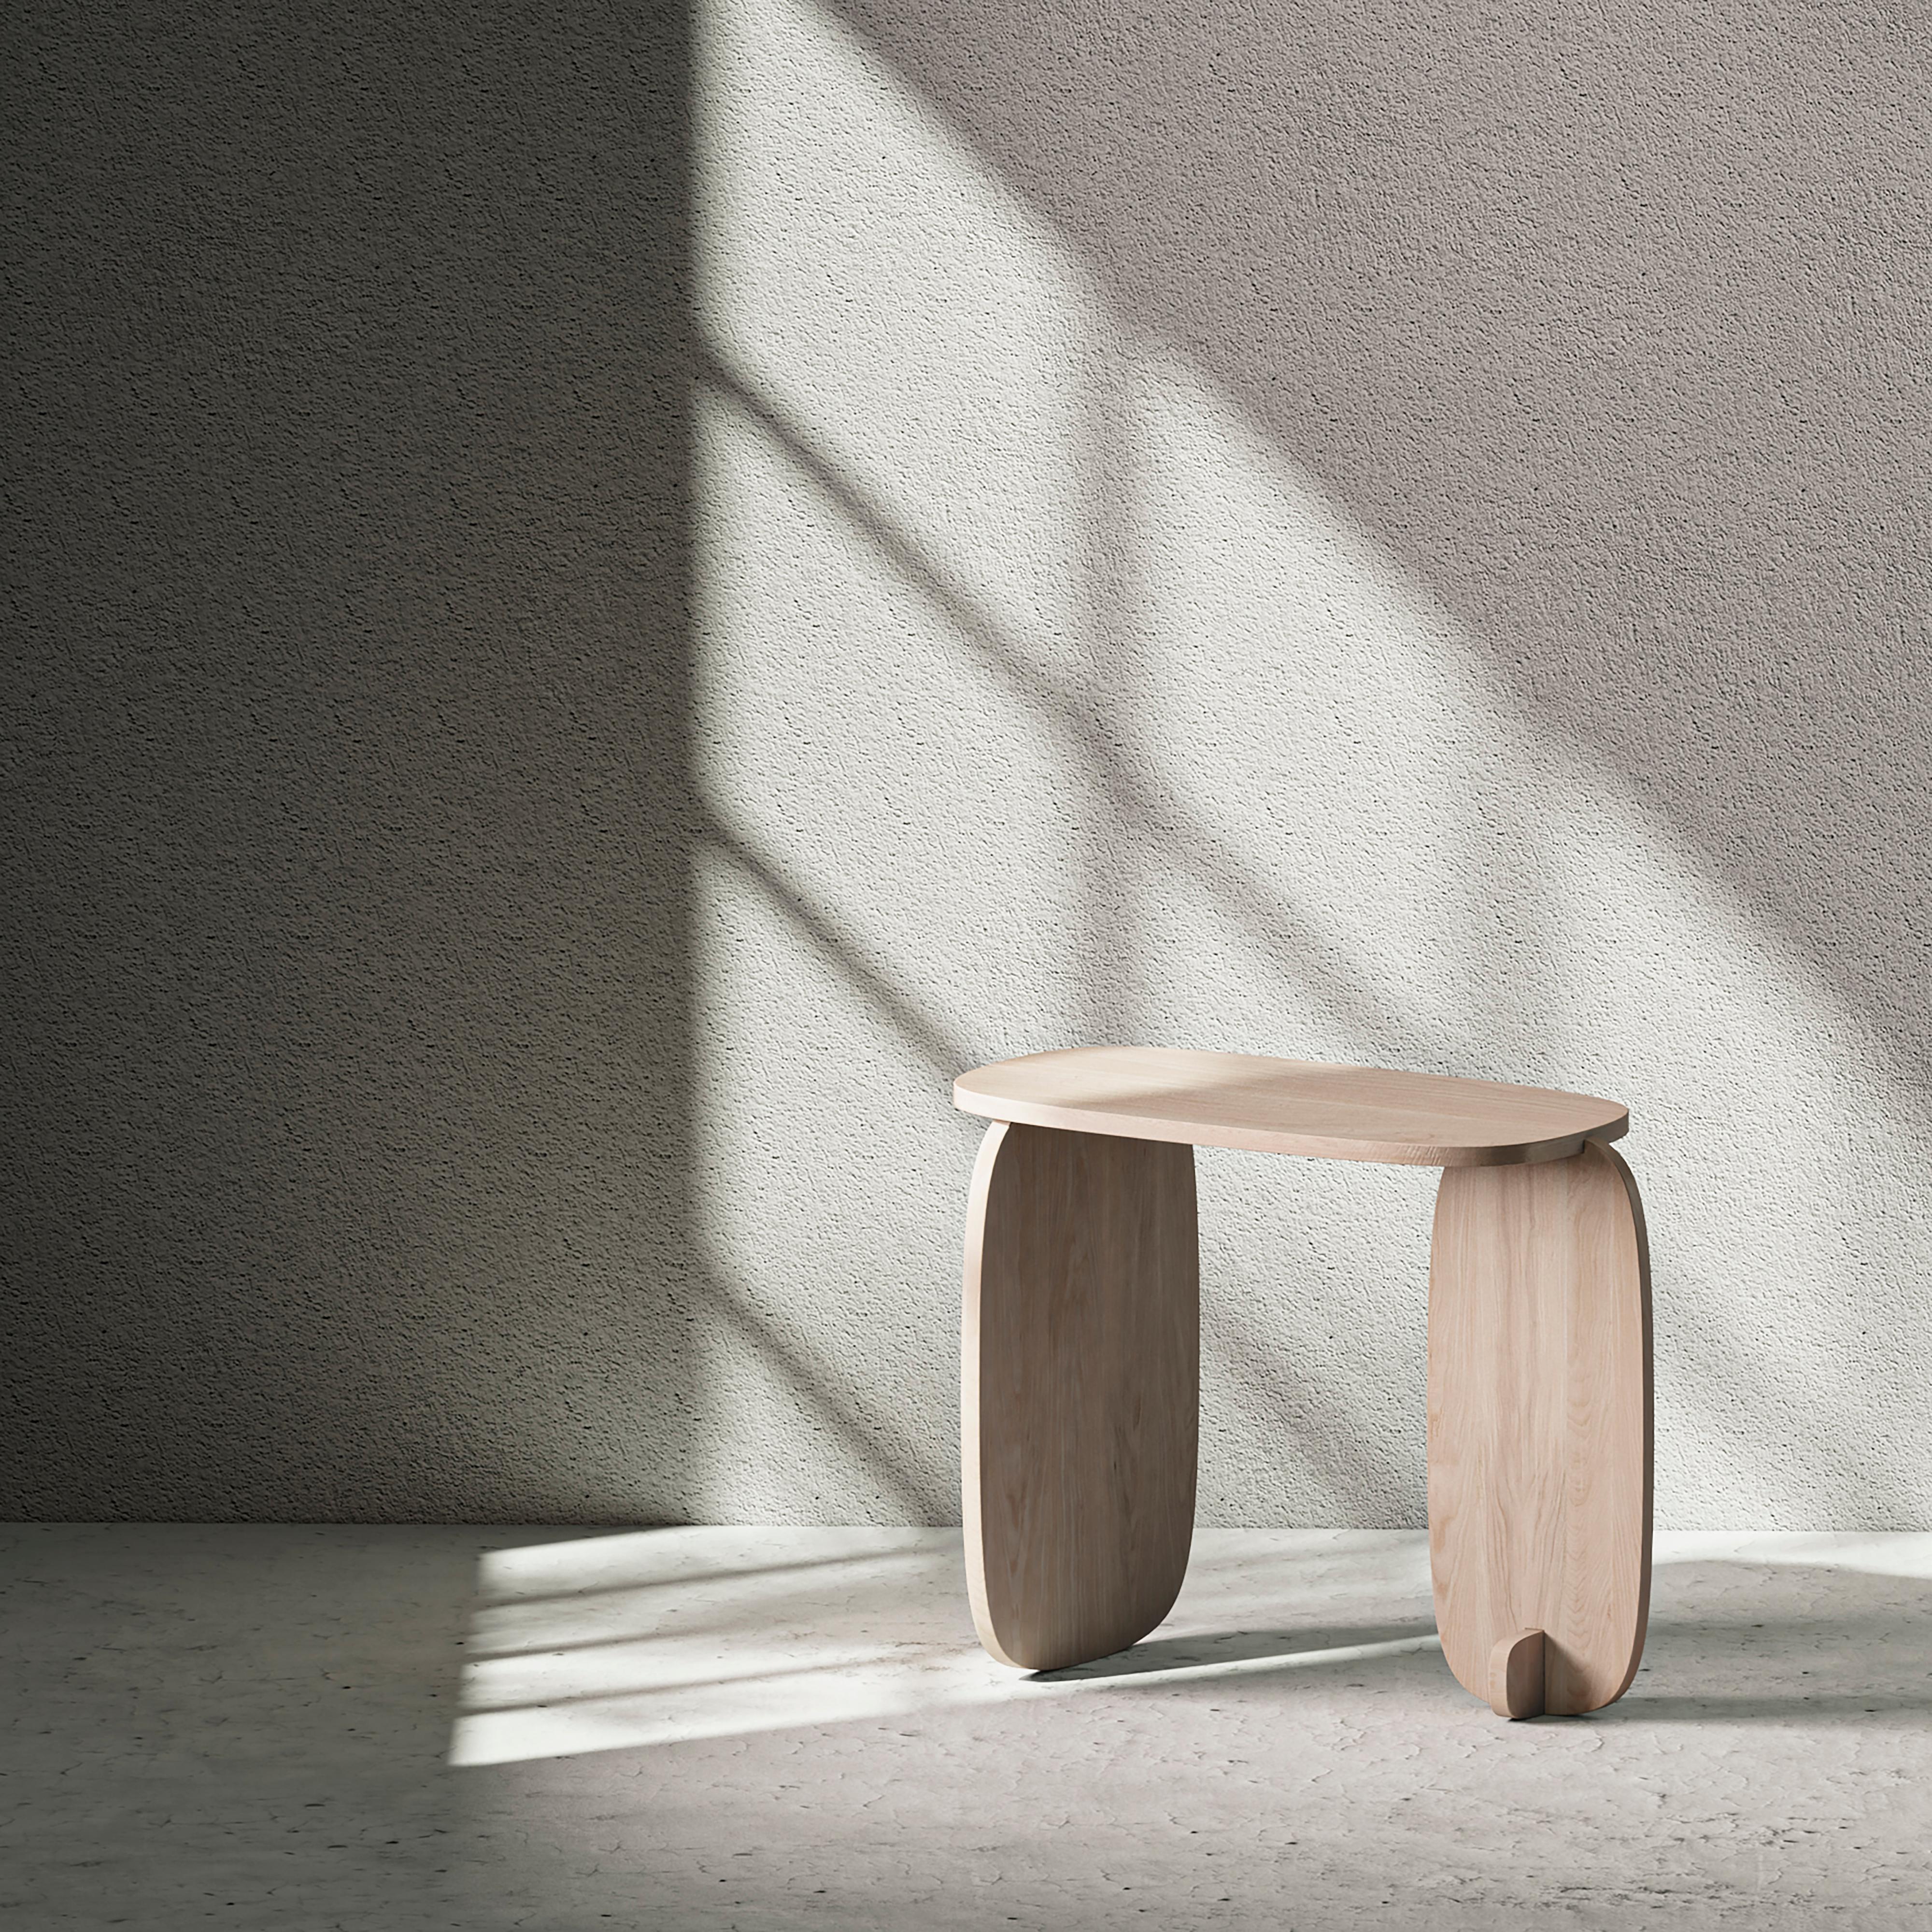 Inspired by the primitive forms of mankind’s earliest buildings, the Foc table is a friendly side table with simple flat parts made of oak without hardware and with careful detail in the joints between the parts.
Foc, which takes its name from the